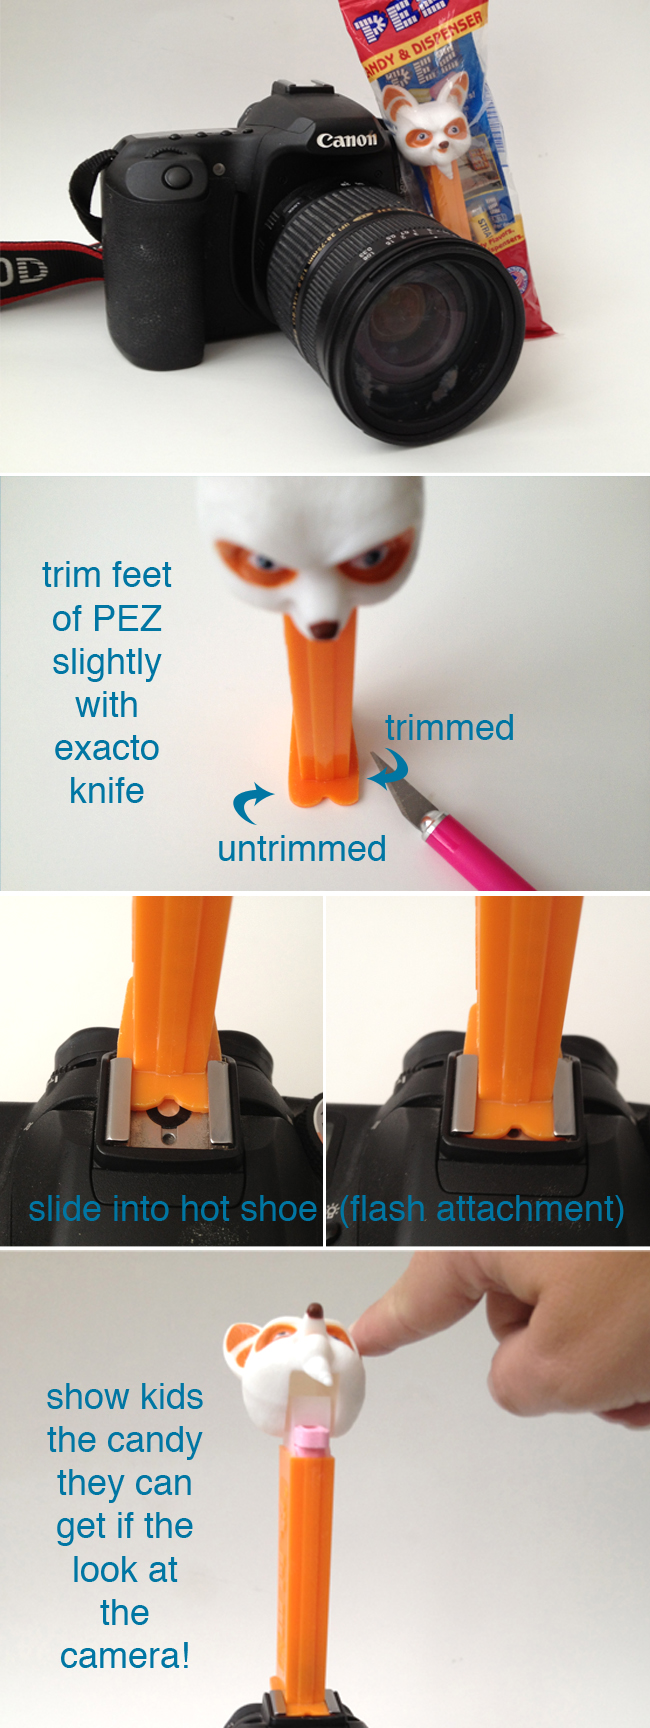 trim the feet of the pez dispenser slightly with an exacto knife; slide bottom of pez dispenser into hotshoe flash attachment; open head of pez dispenser to show candy to kids